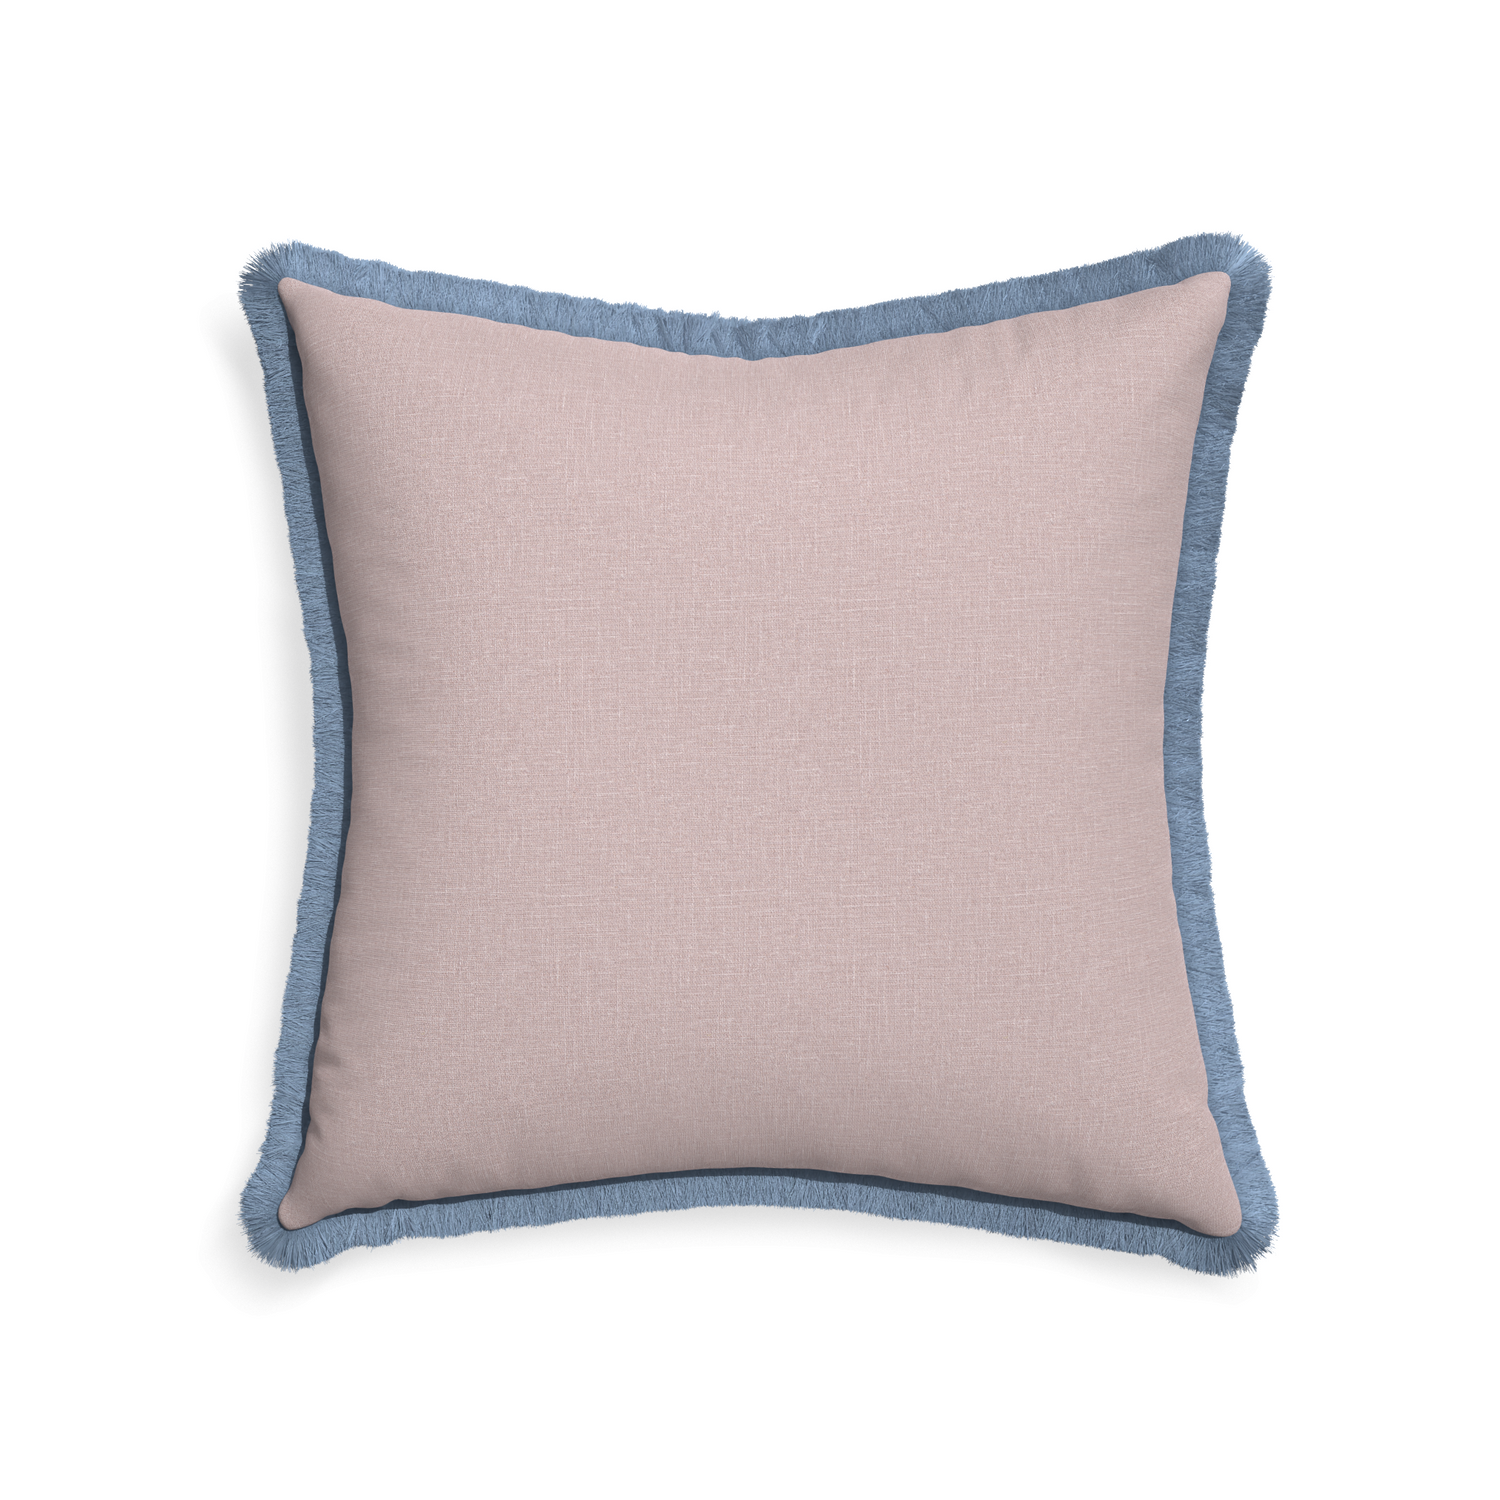 22-square orchid custom mauve pinkpillow with sky fringe on white background